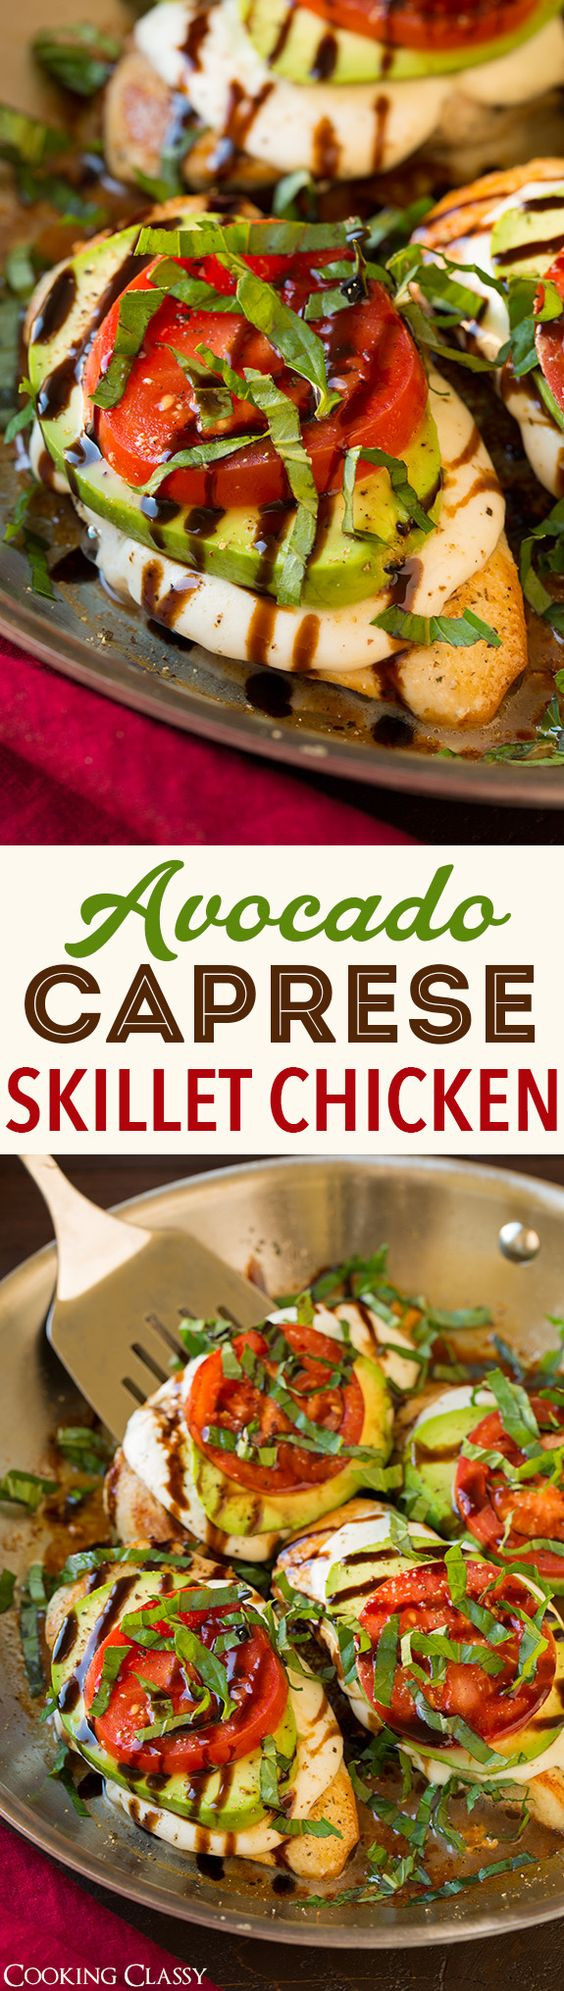 Avocado Dinner Recipes
 Chicken Recipes The BEST of our FAVORITE Chicken Family